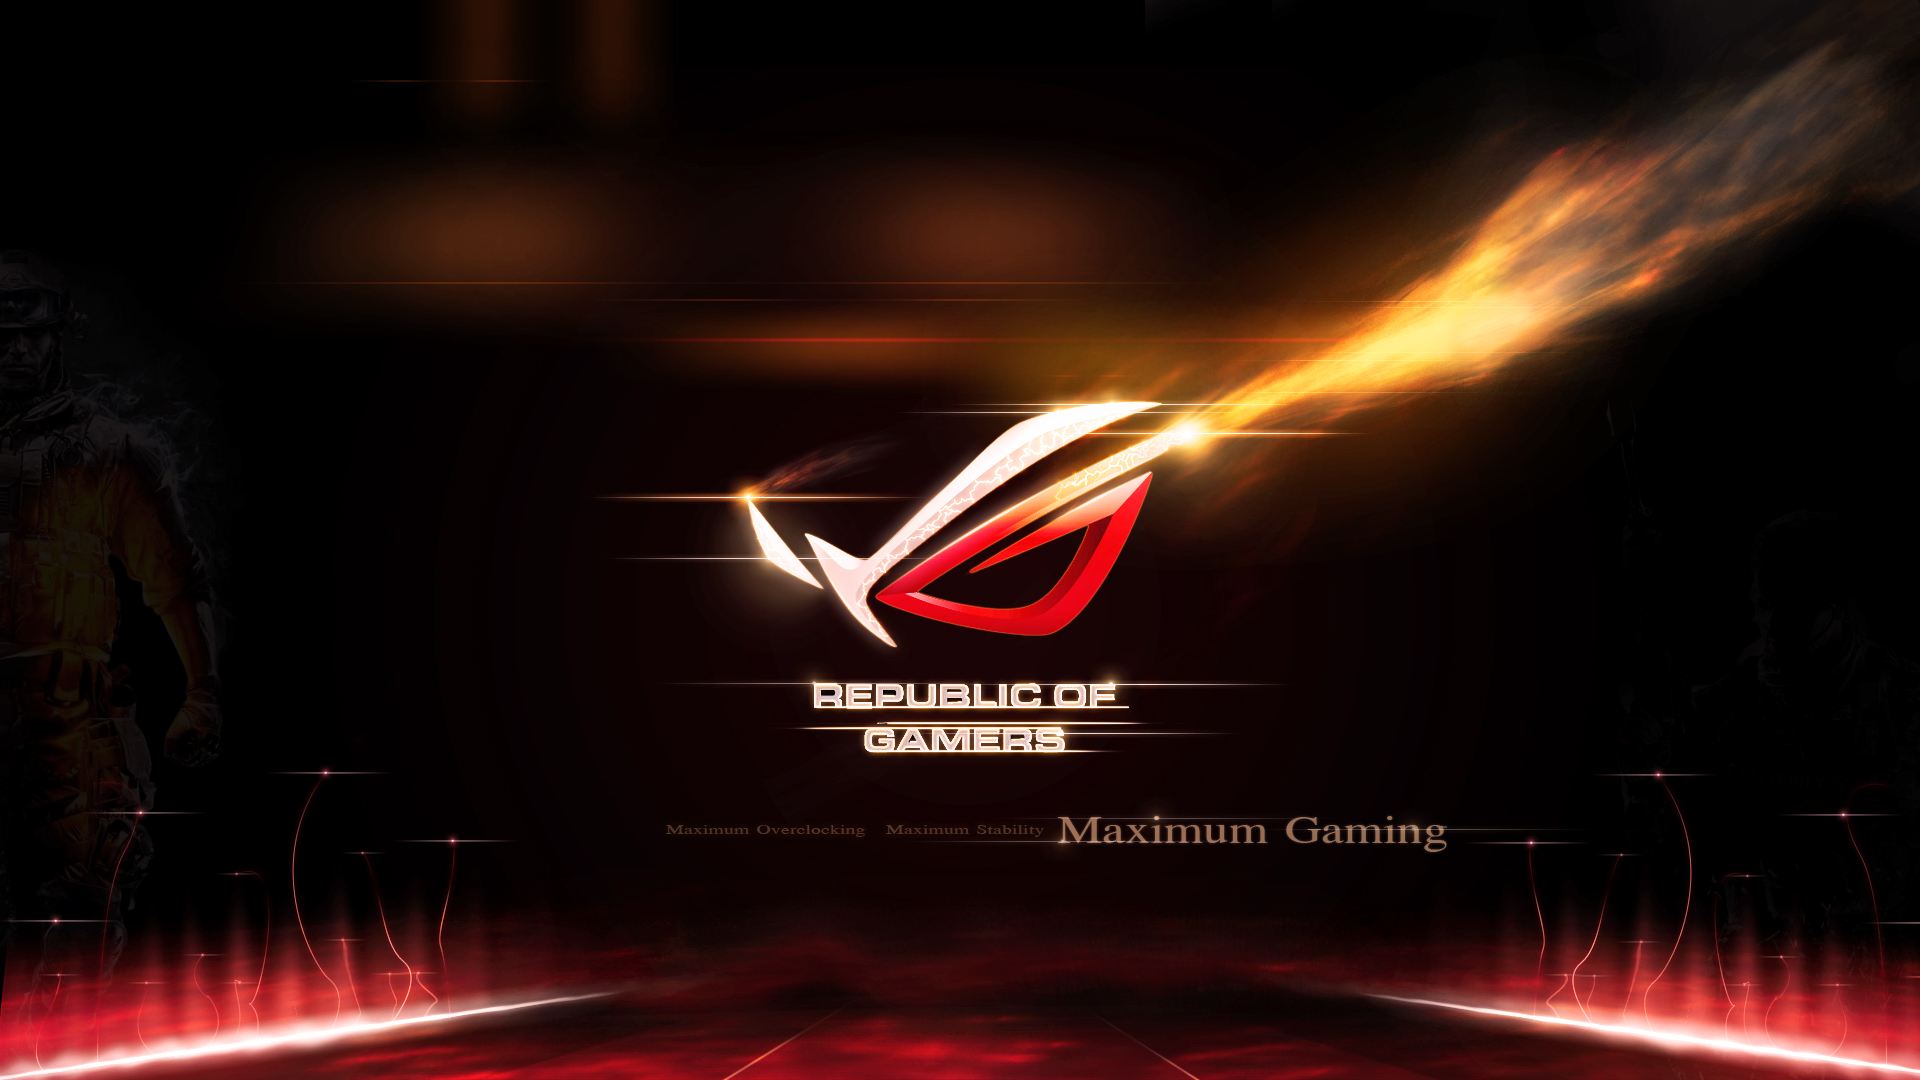 Free Download Asus Rog Wallpaper Full Hd 1920x1080 For Your